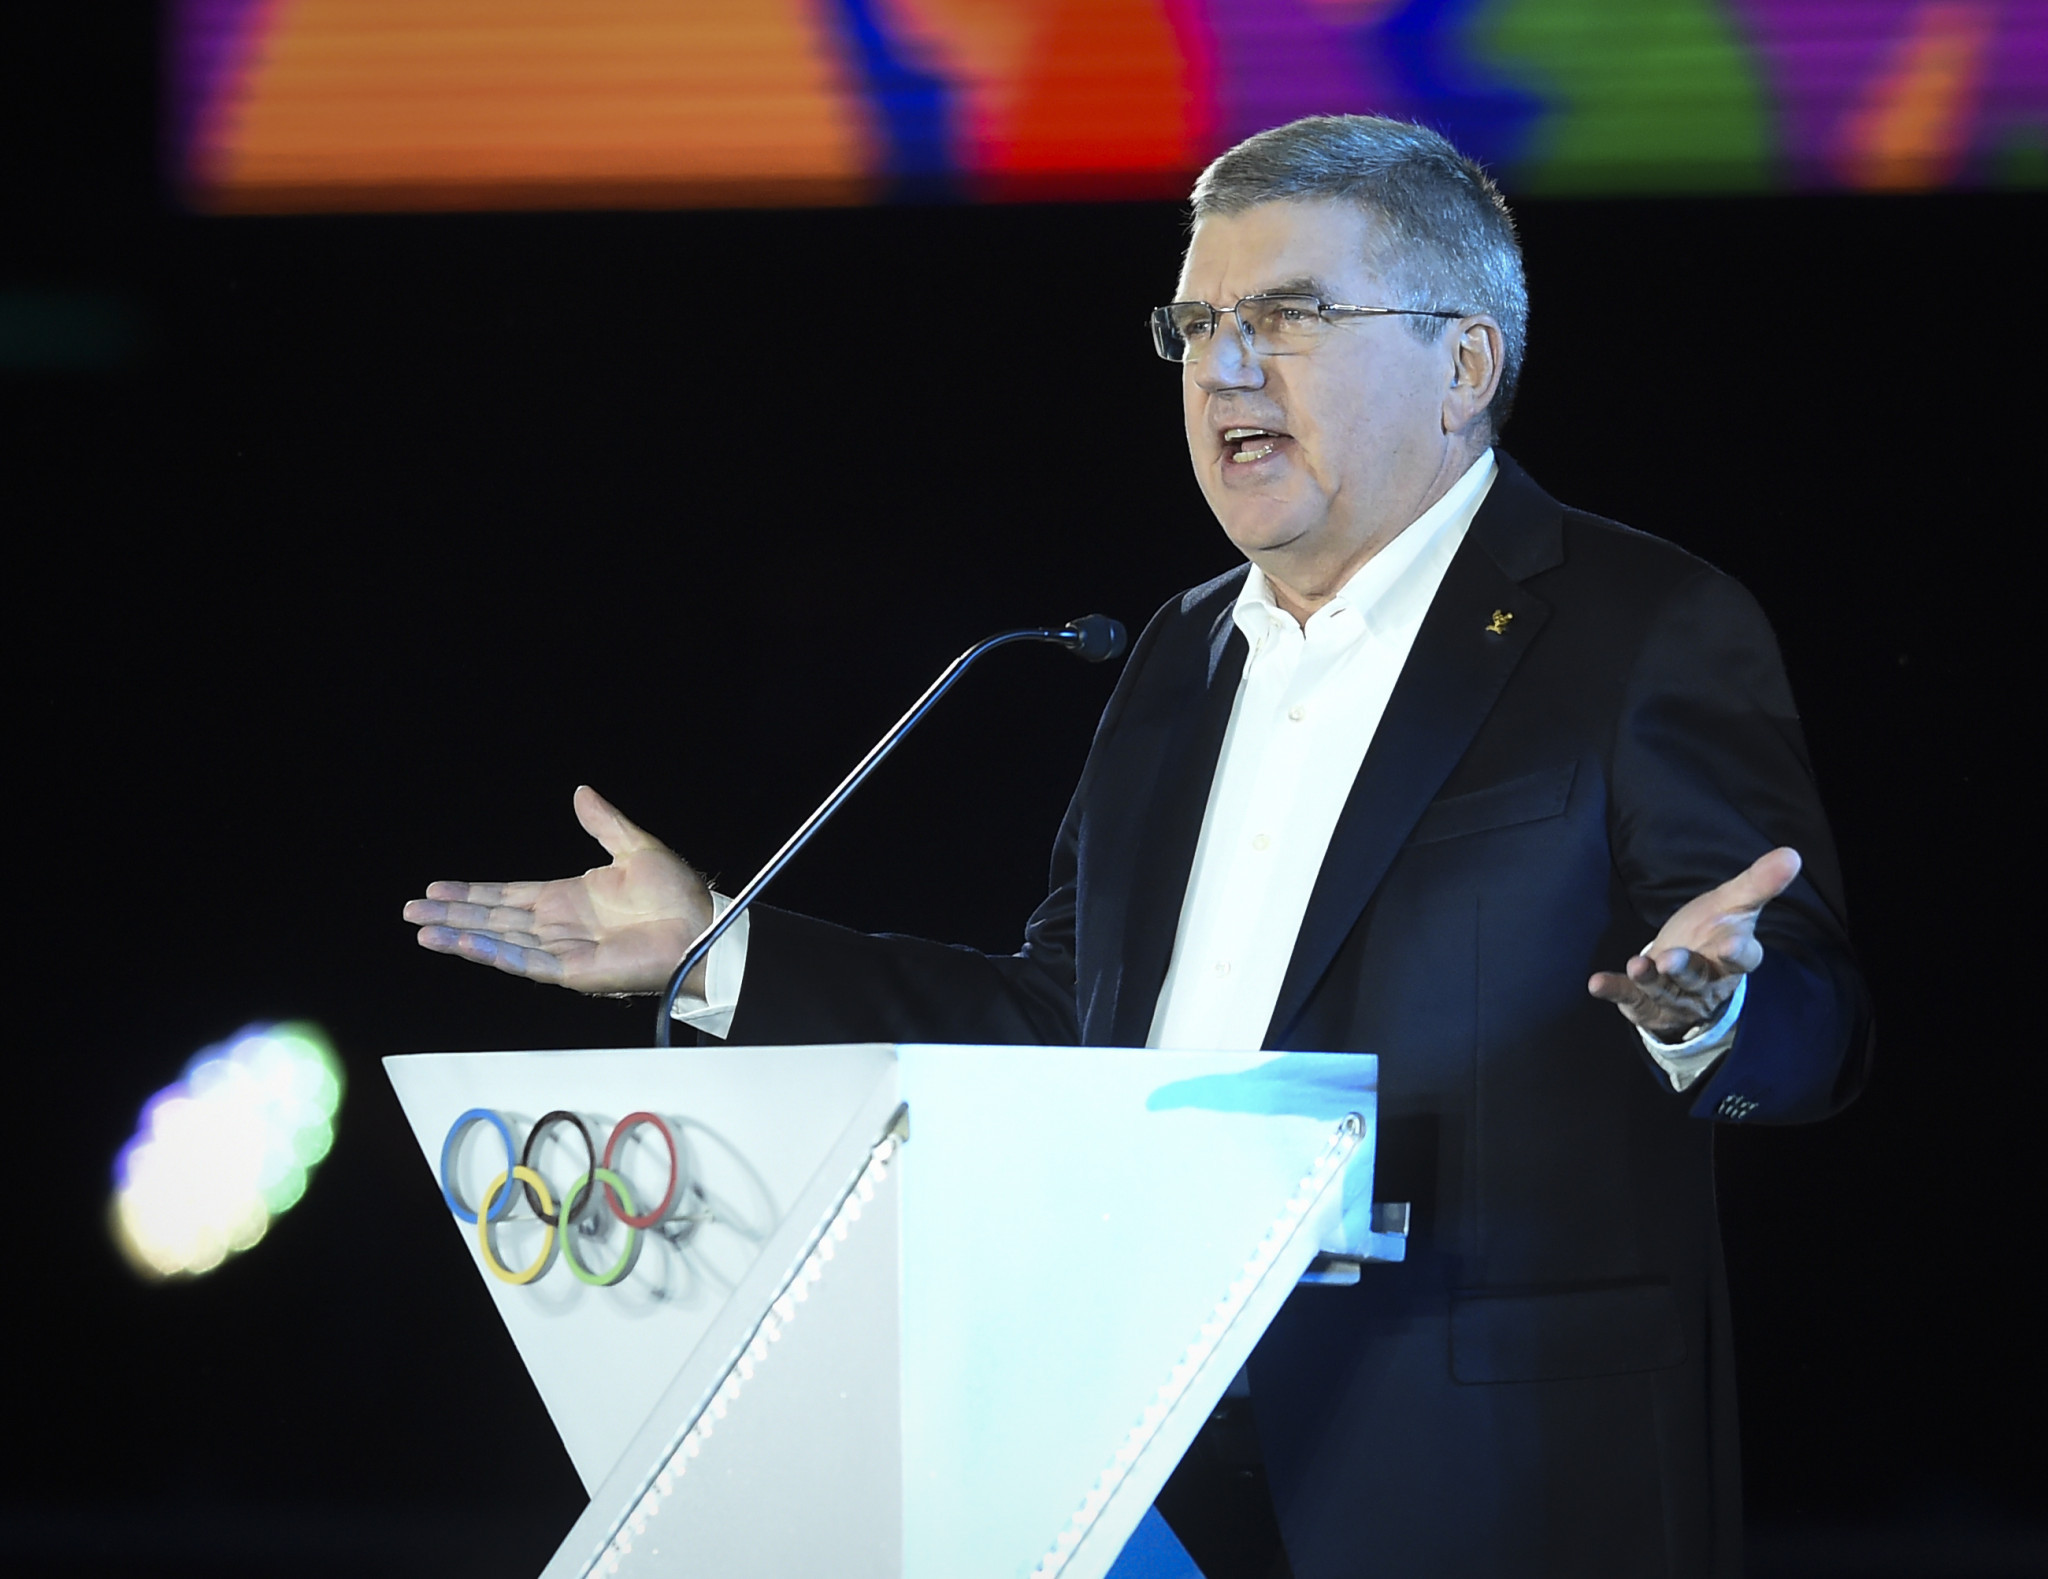 IOC President Thomas Bach will preside over the Session ©Getty Images